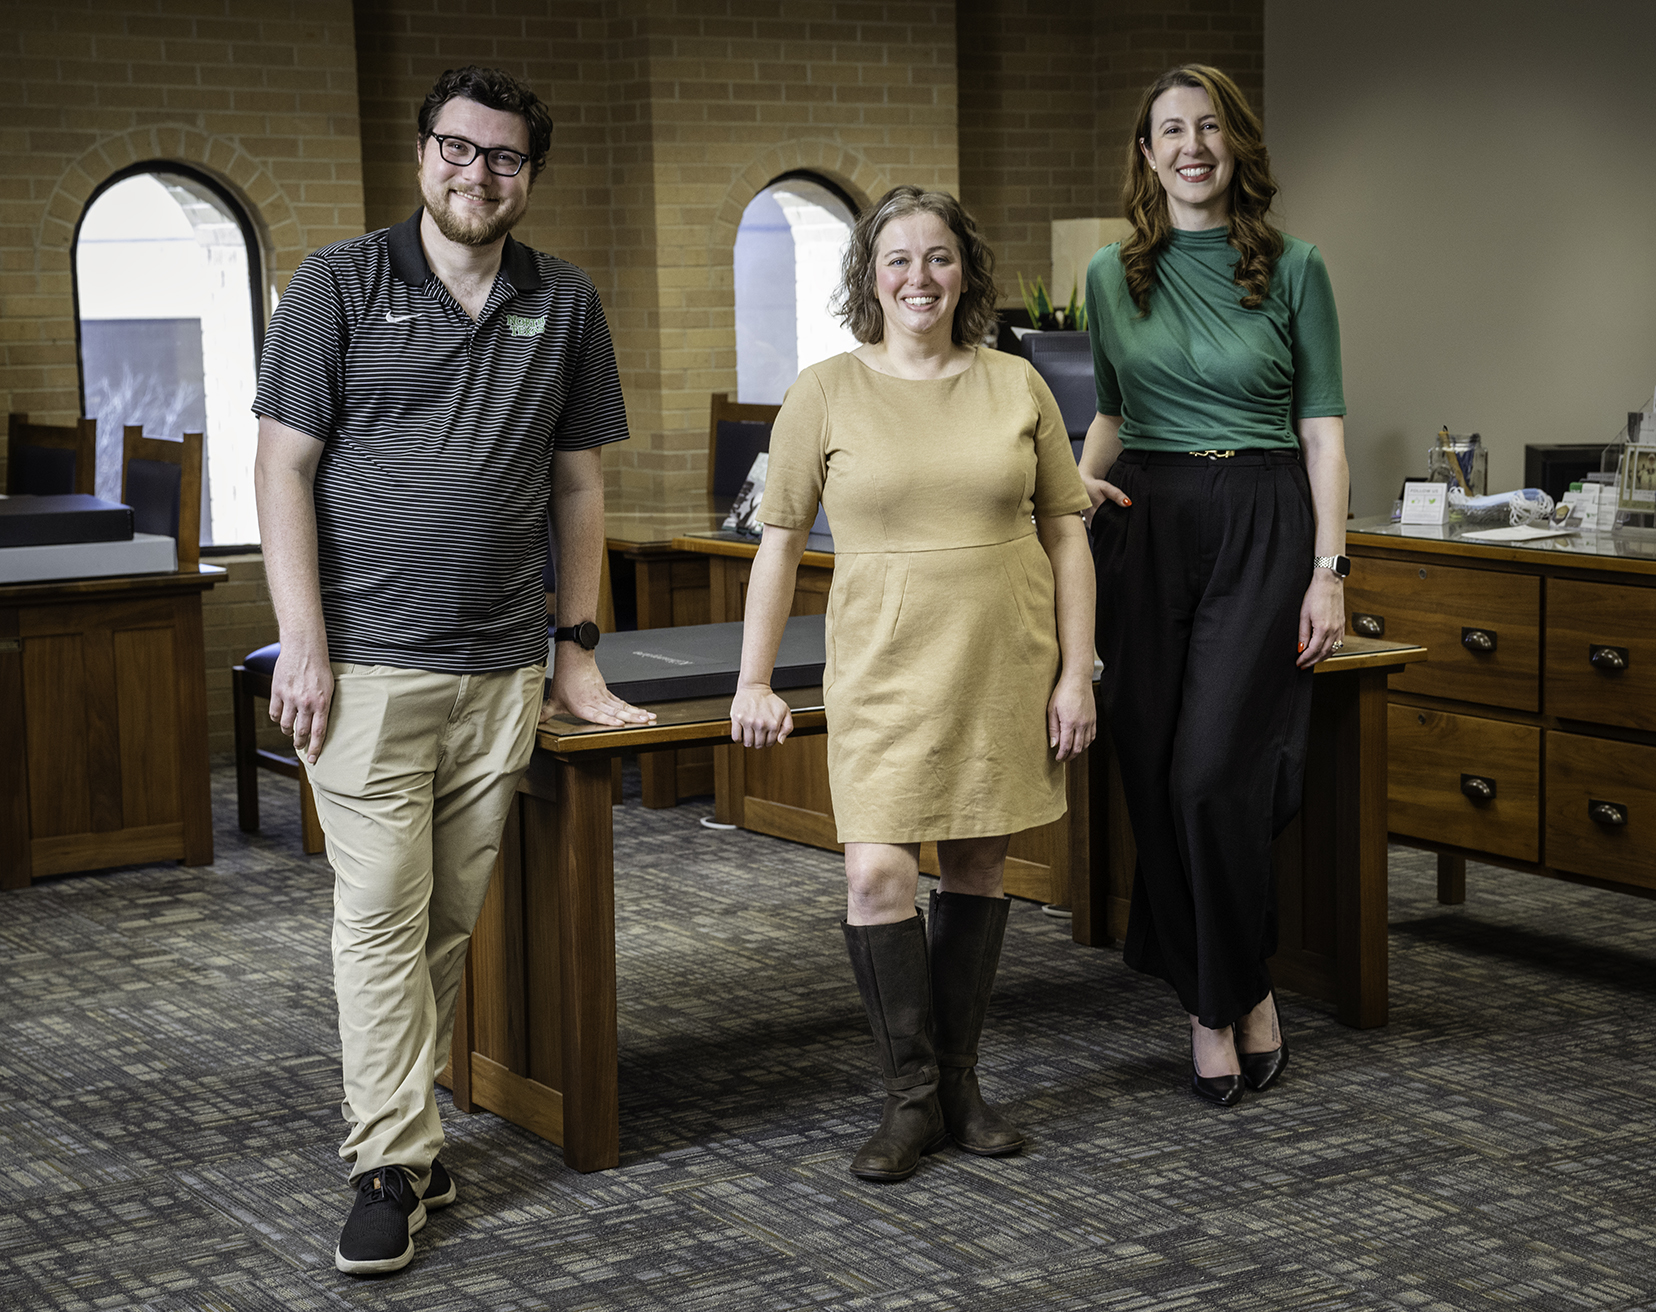 Photo of UNT researchers Brady Lund, Ana Roeschley and Morgan Gieringer in UNT Special Collections